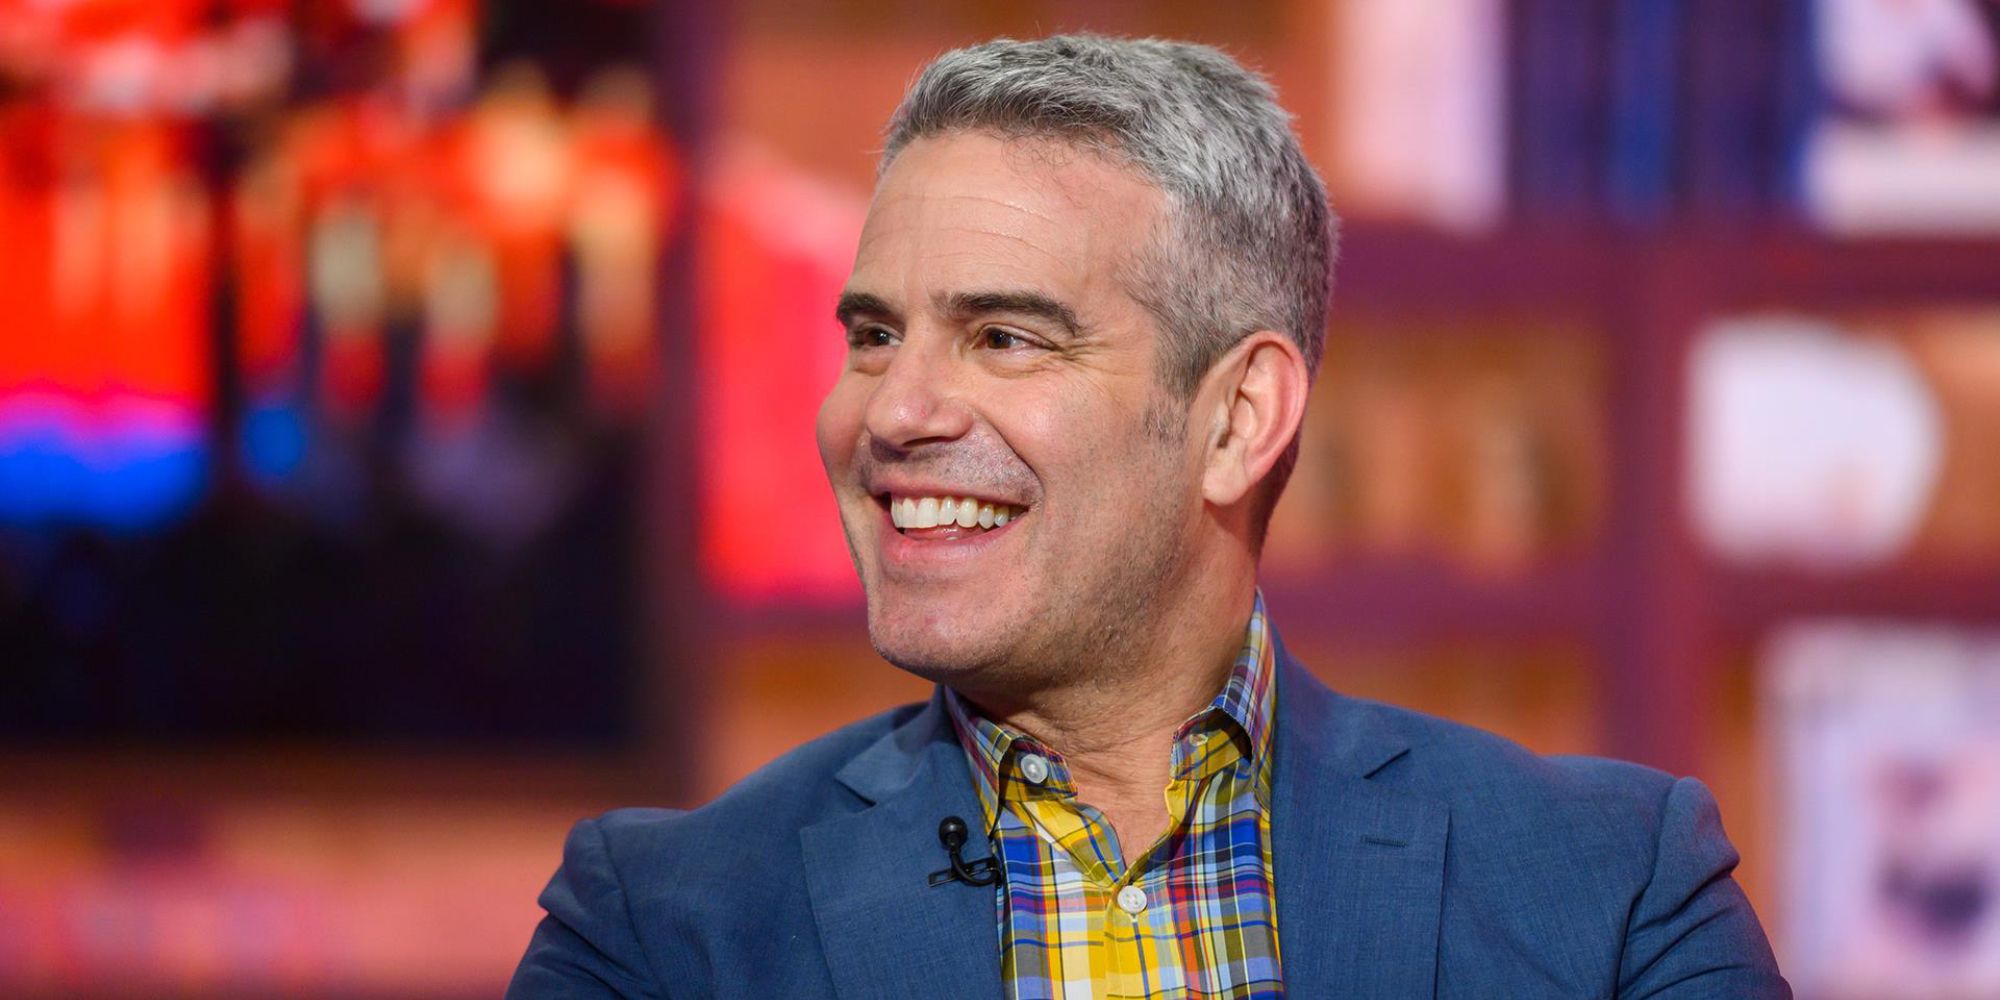 Andy Cohen from Watch What Happens Live